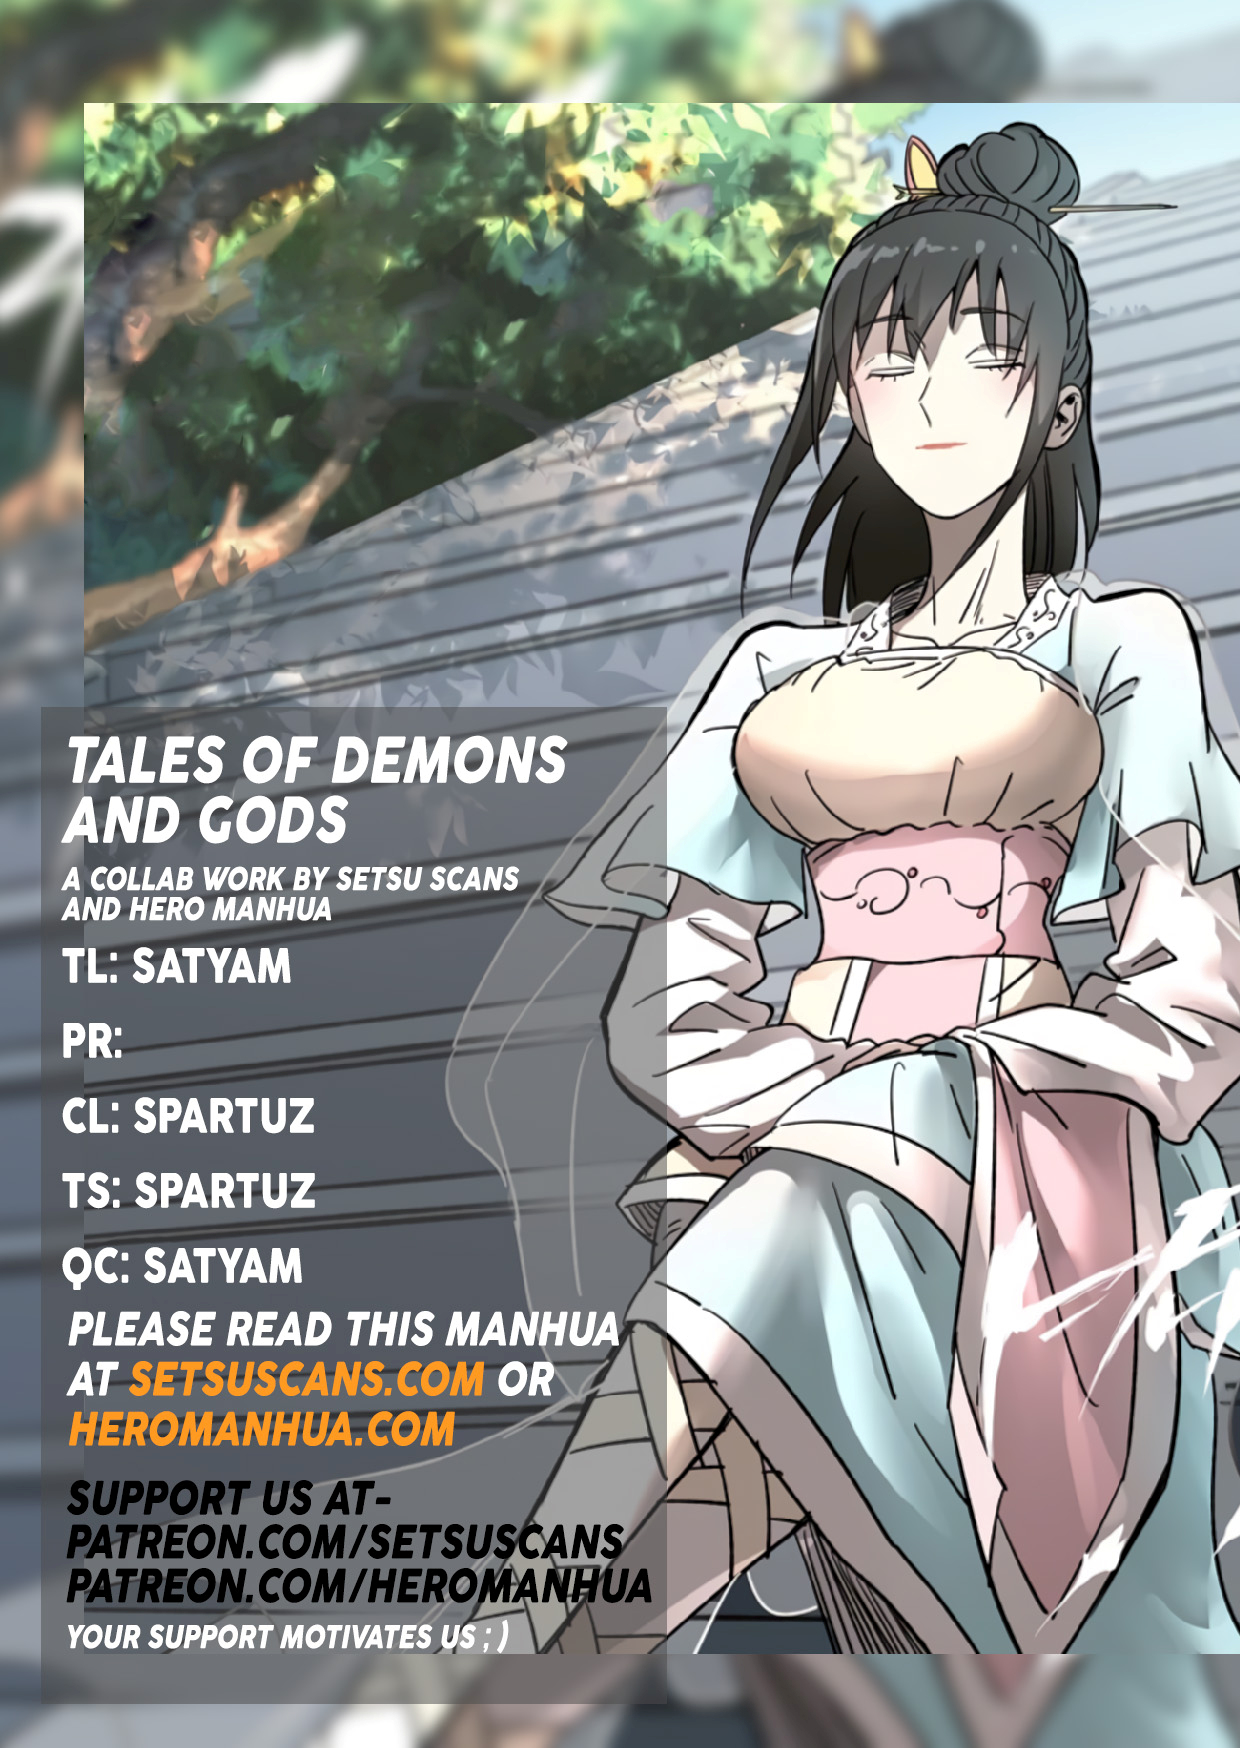 Tales of Demons and Gods - Chapter 10733 - Disgrace (2) - Image 1